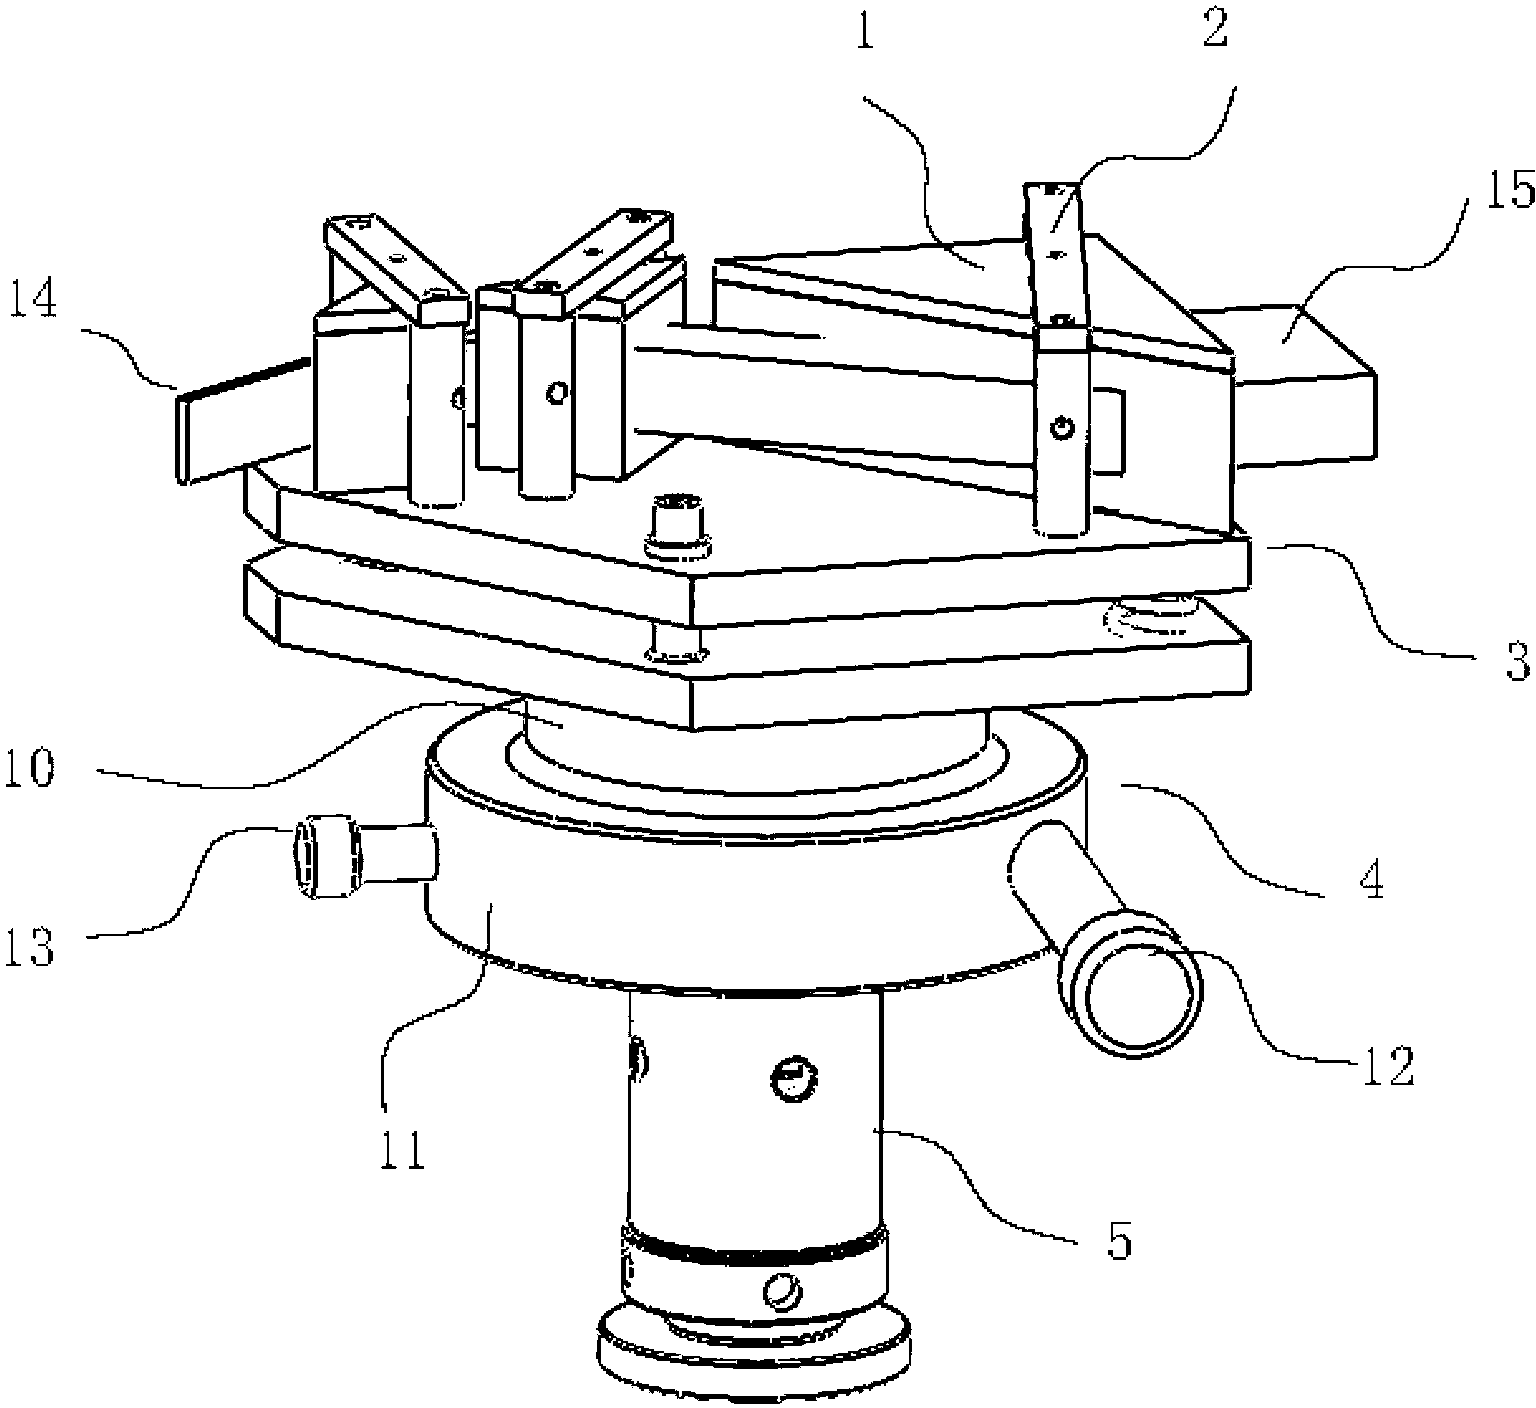 Prism beam expanding device